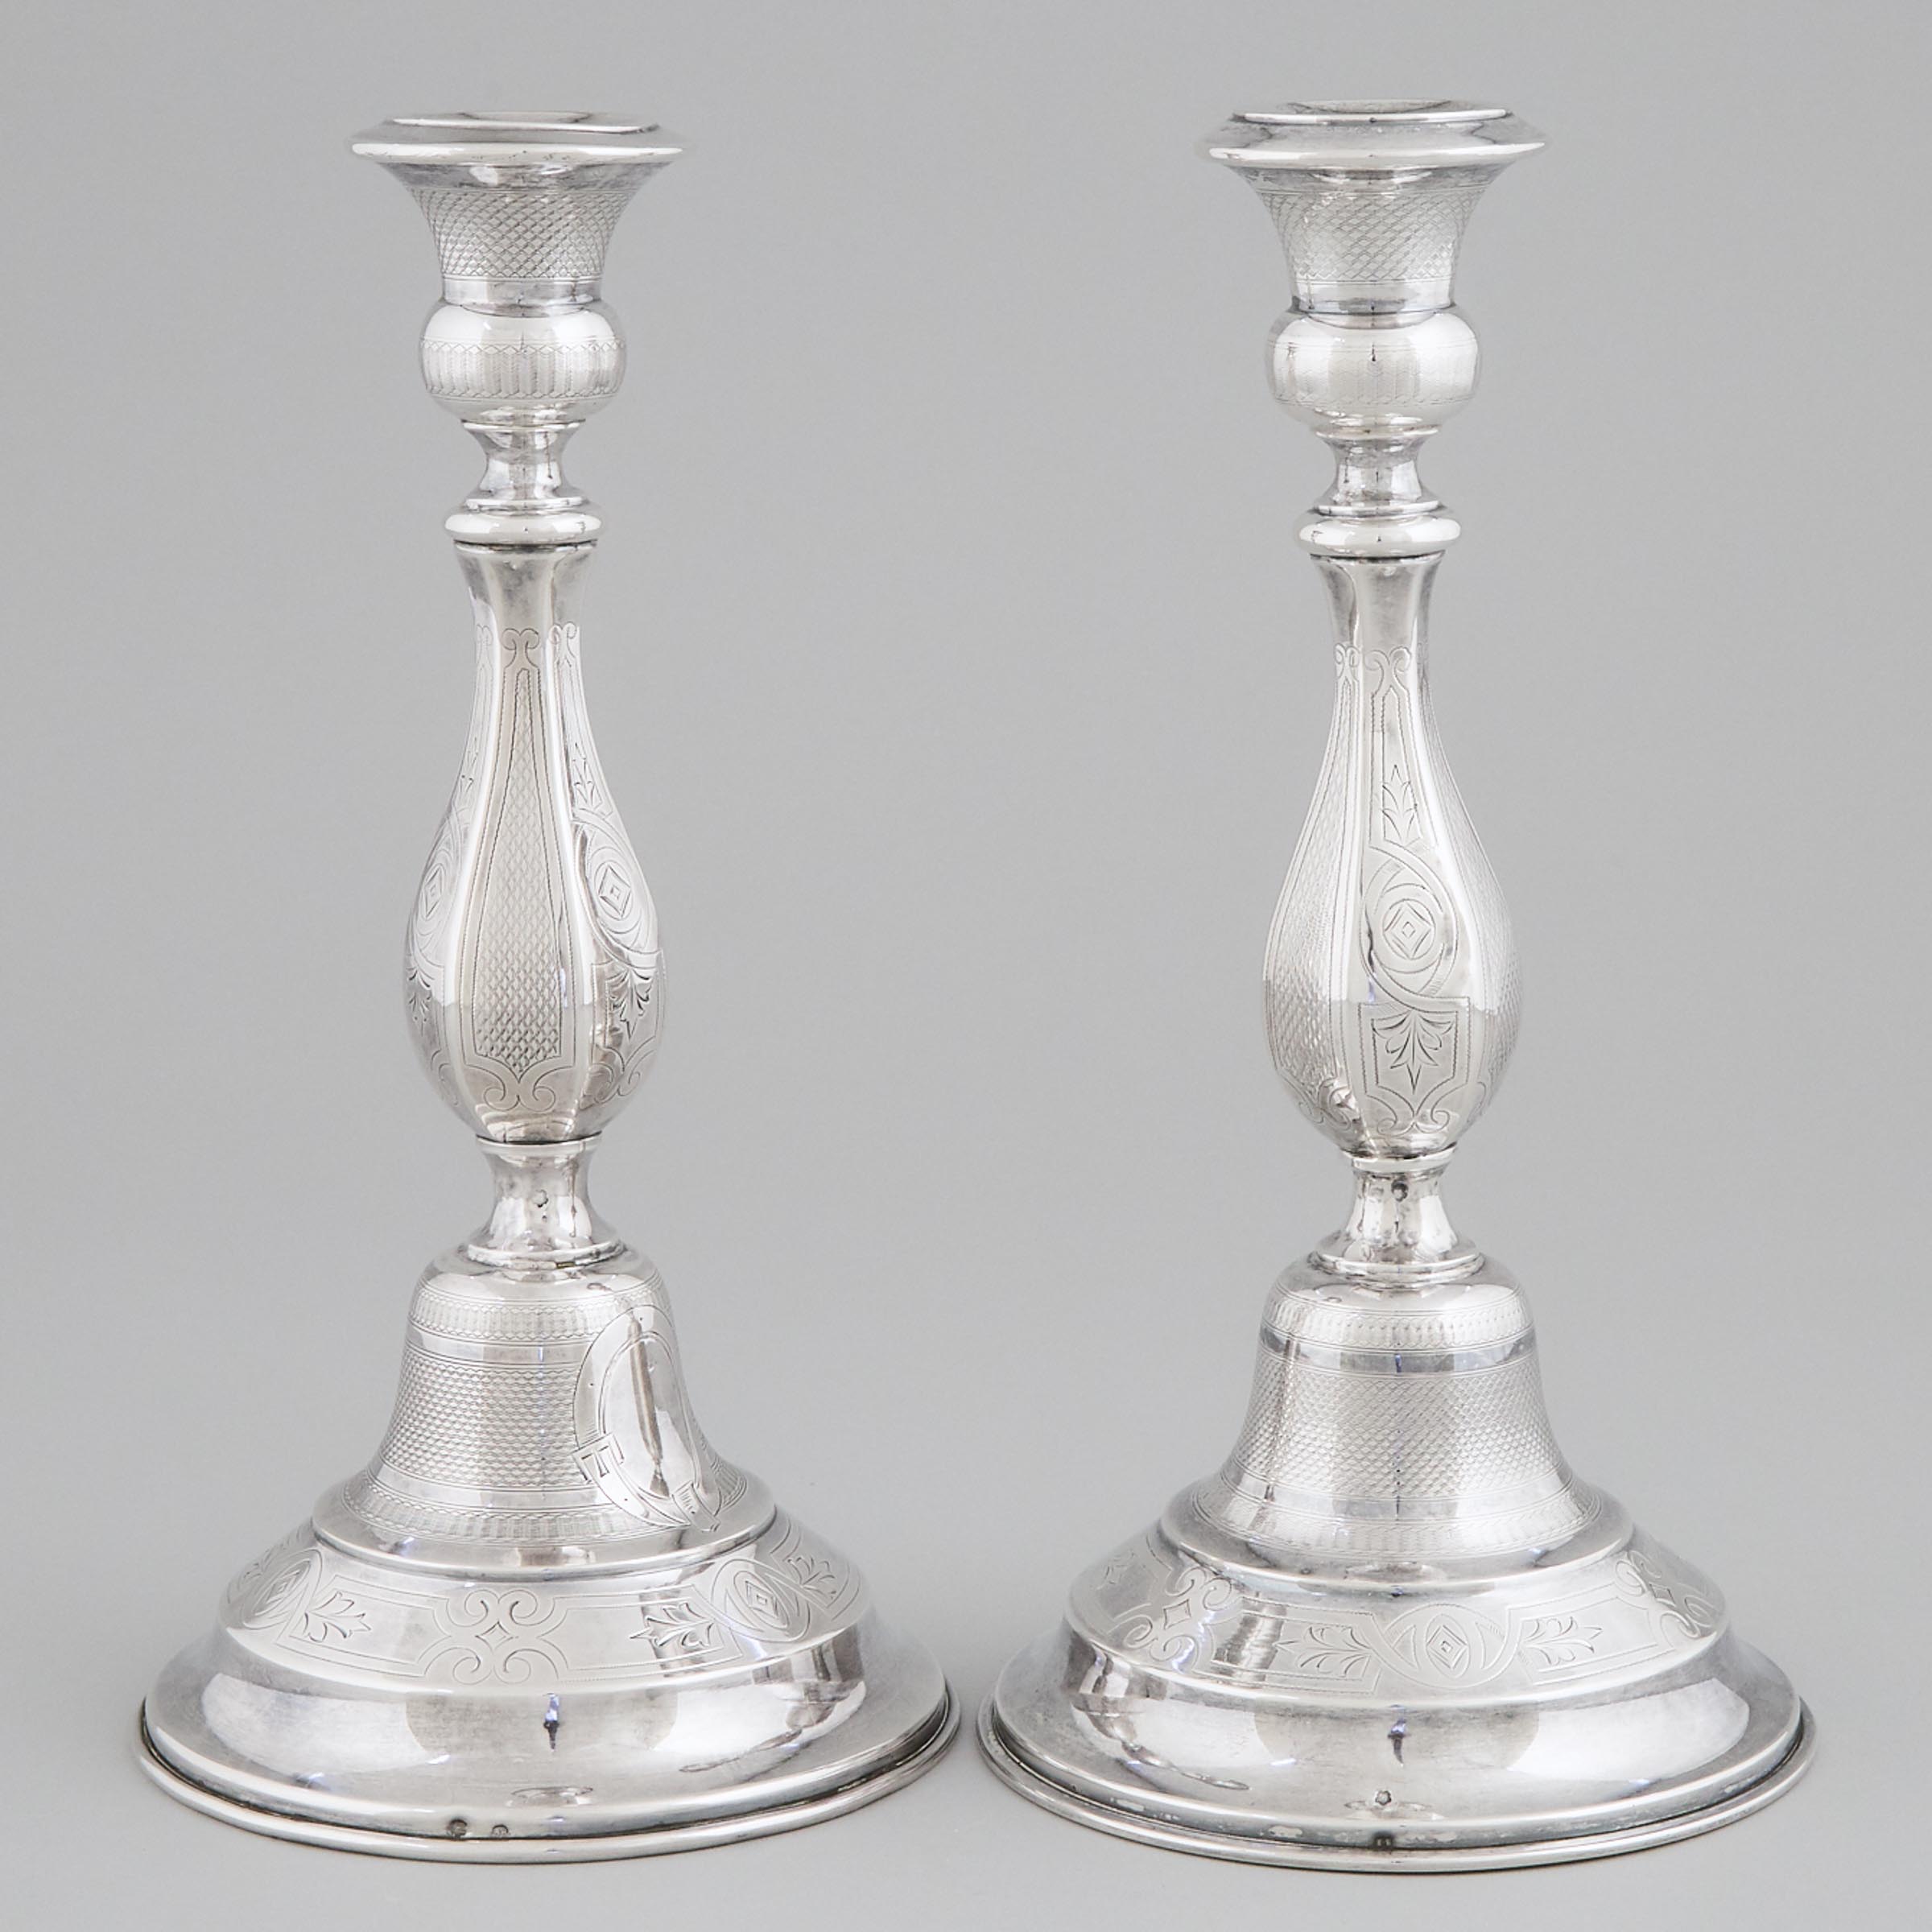 Pair of Austro-Hungarian Silver Table Candlesticks, Vienna, late 19th century